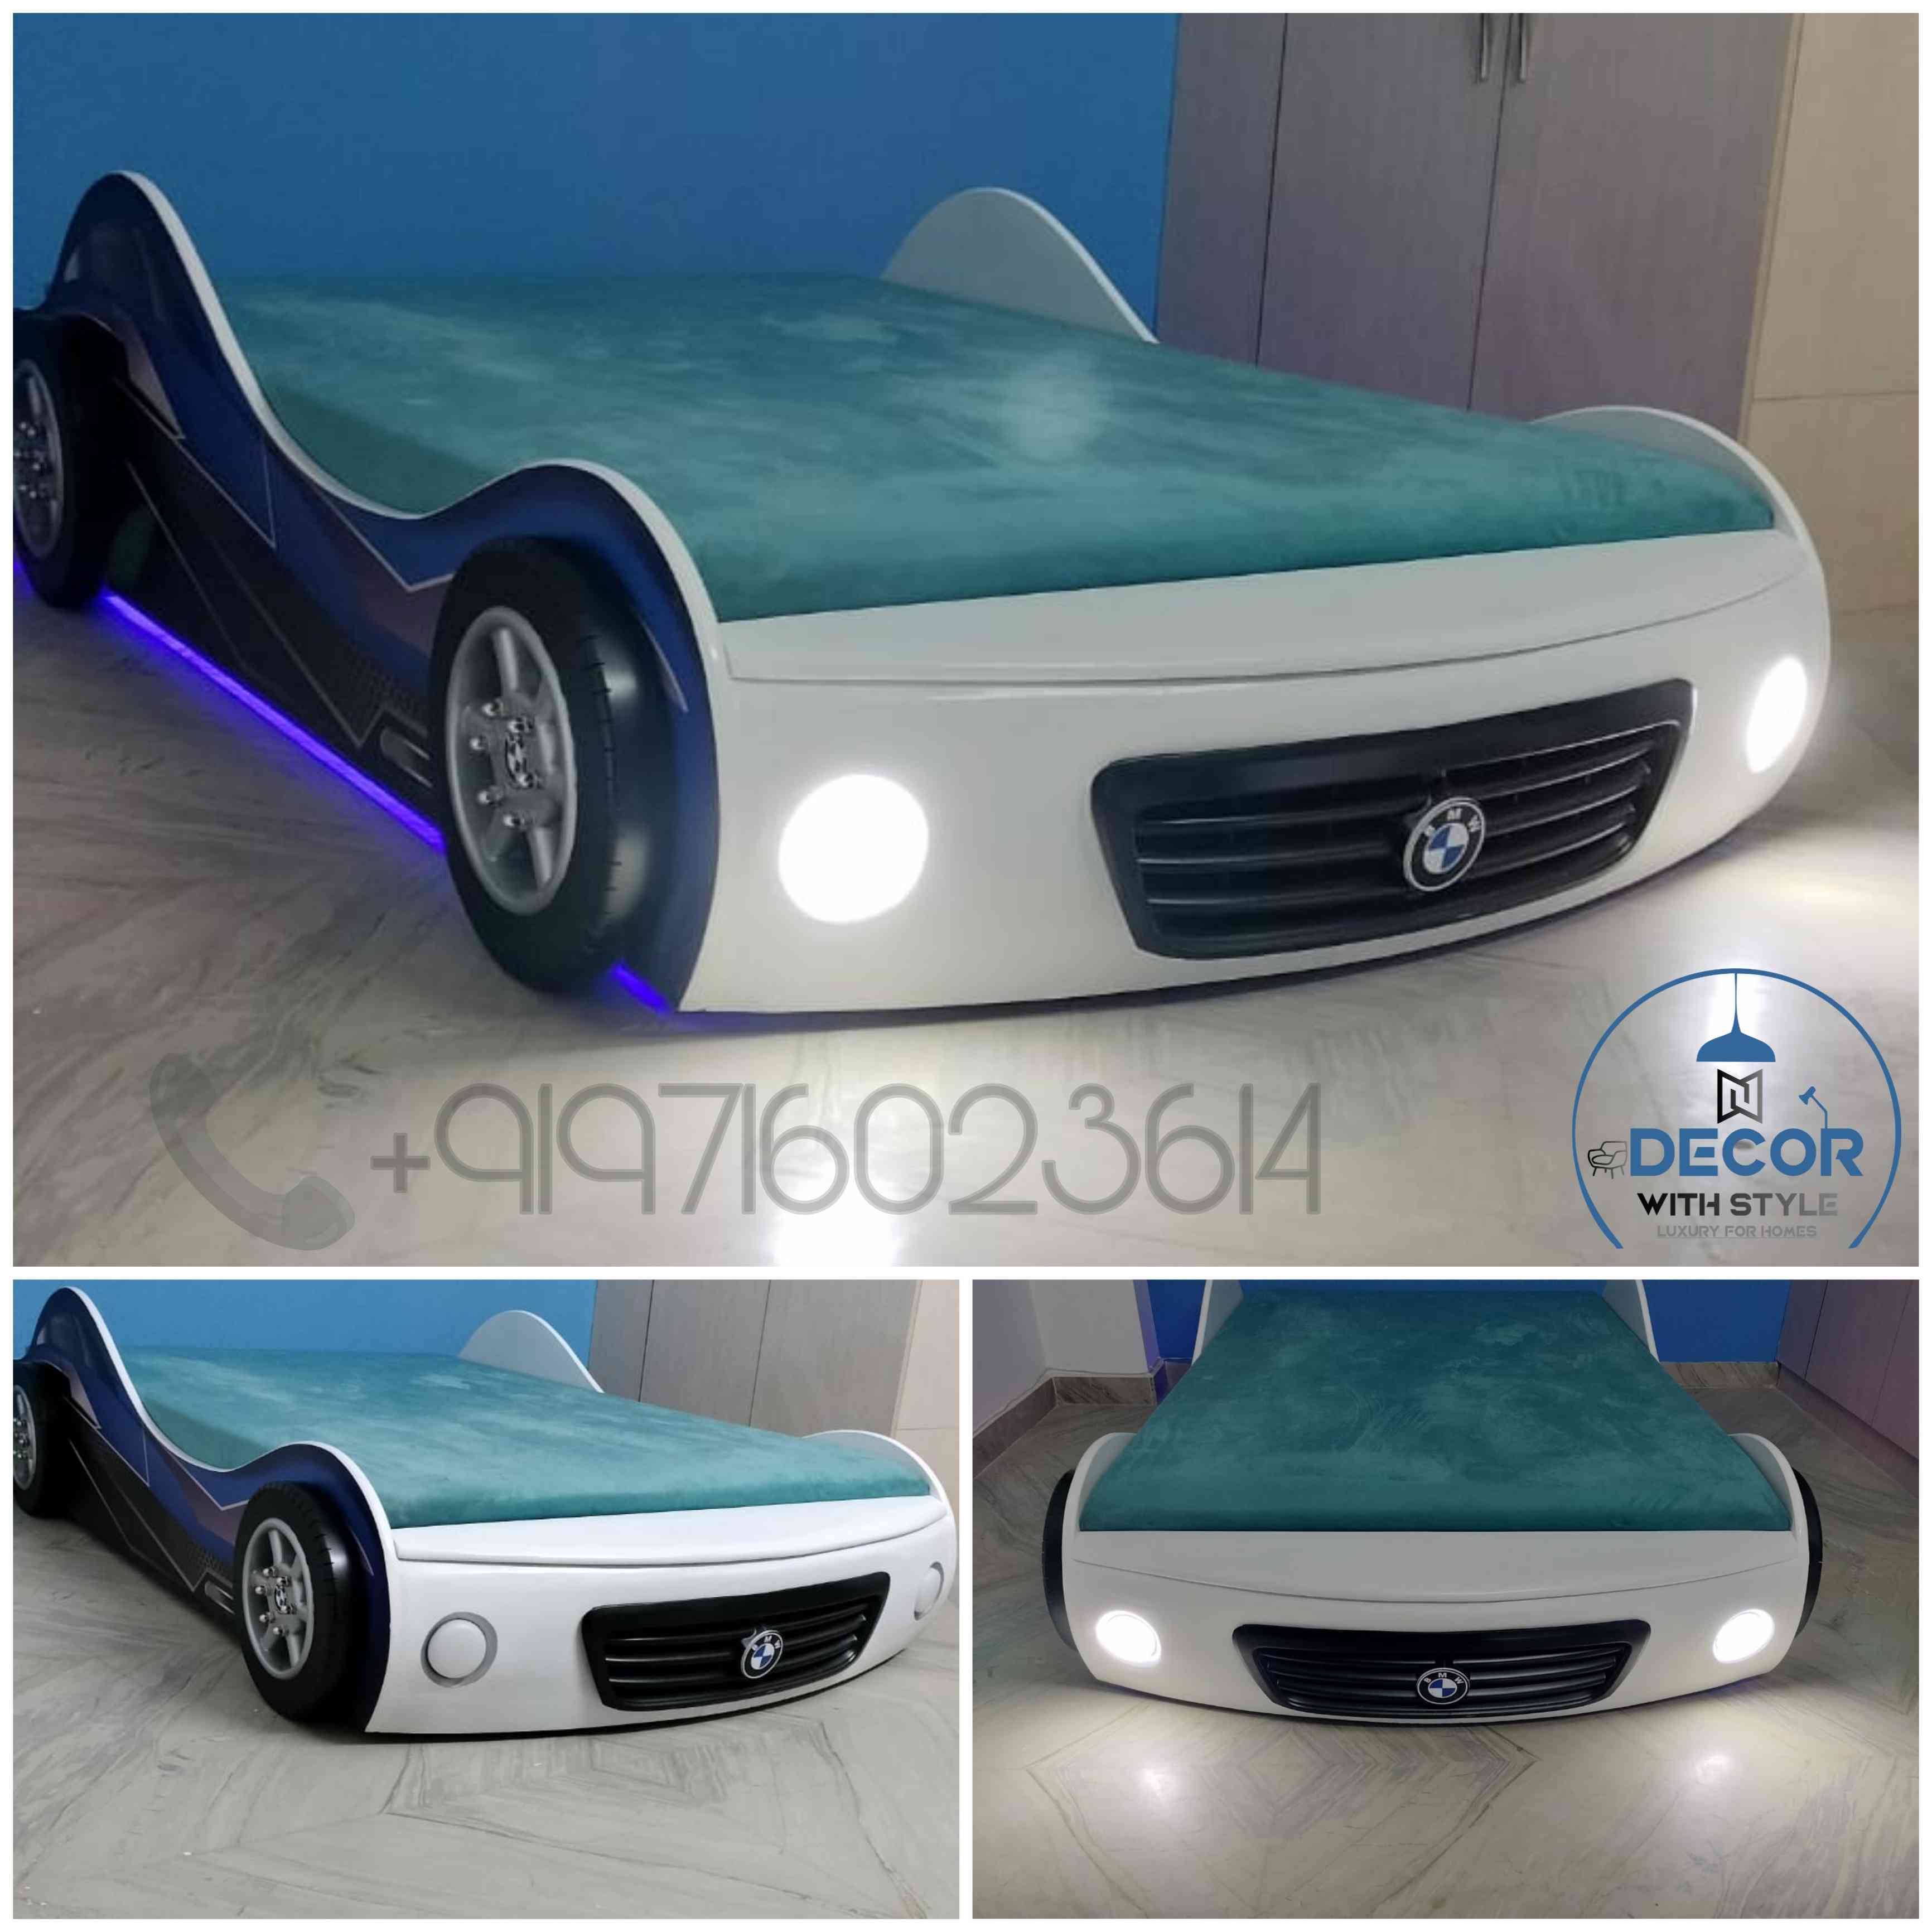 Car Shaped Bed For Children